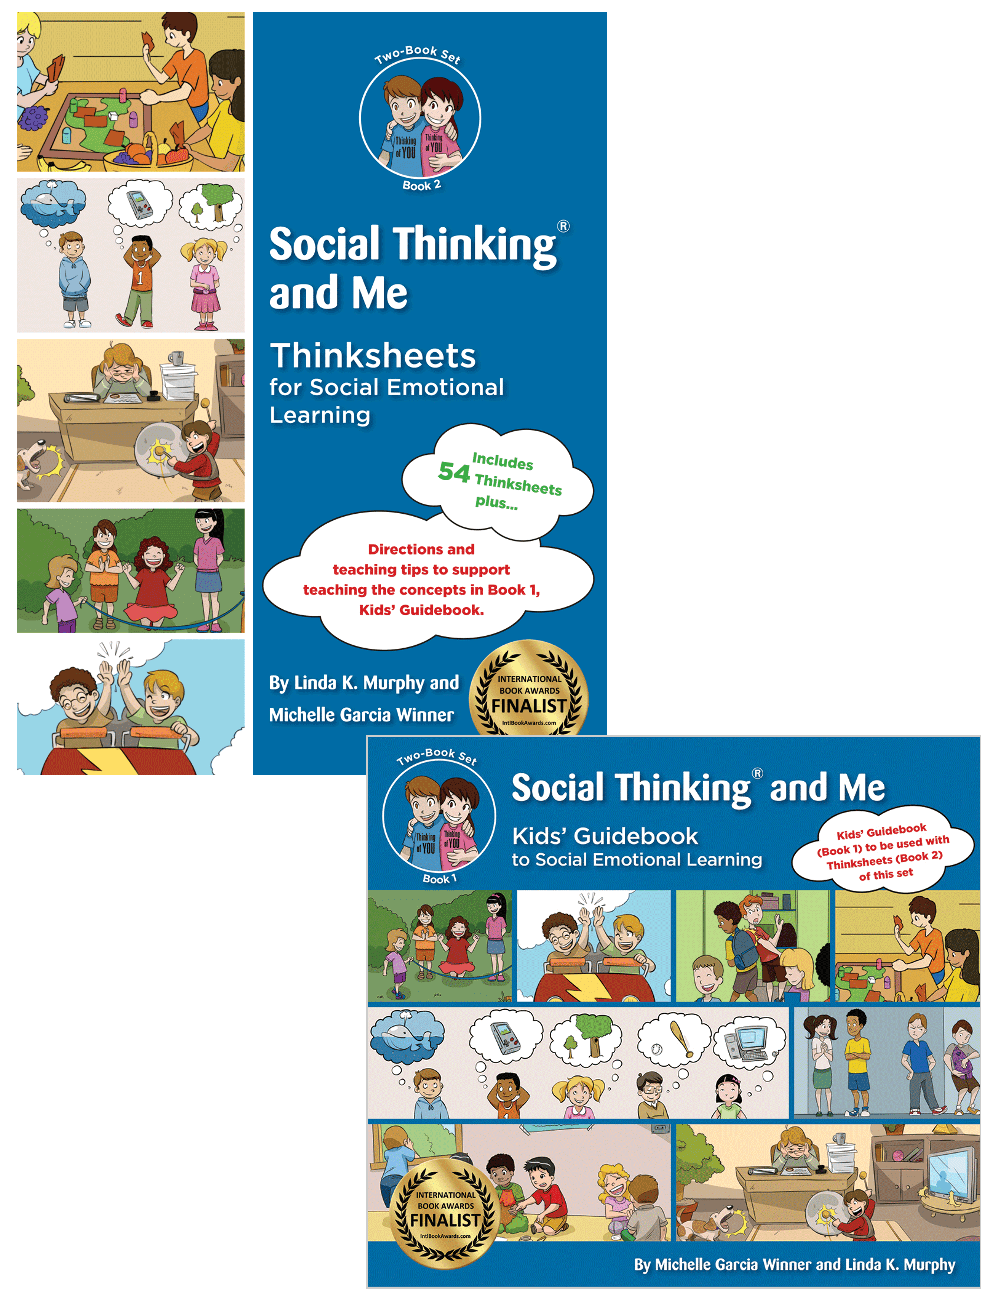 Socialthinking - What's a Friend, and Do I Really Need Friends?